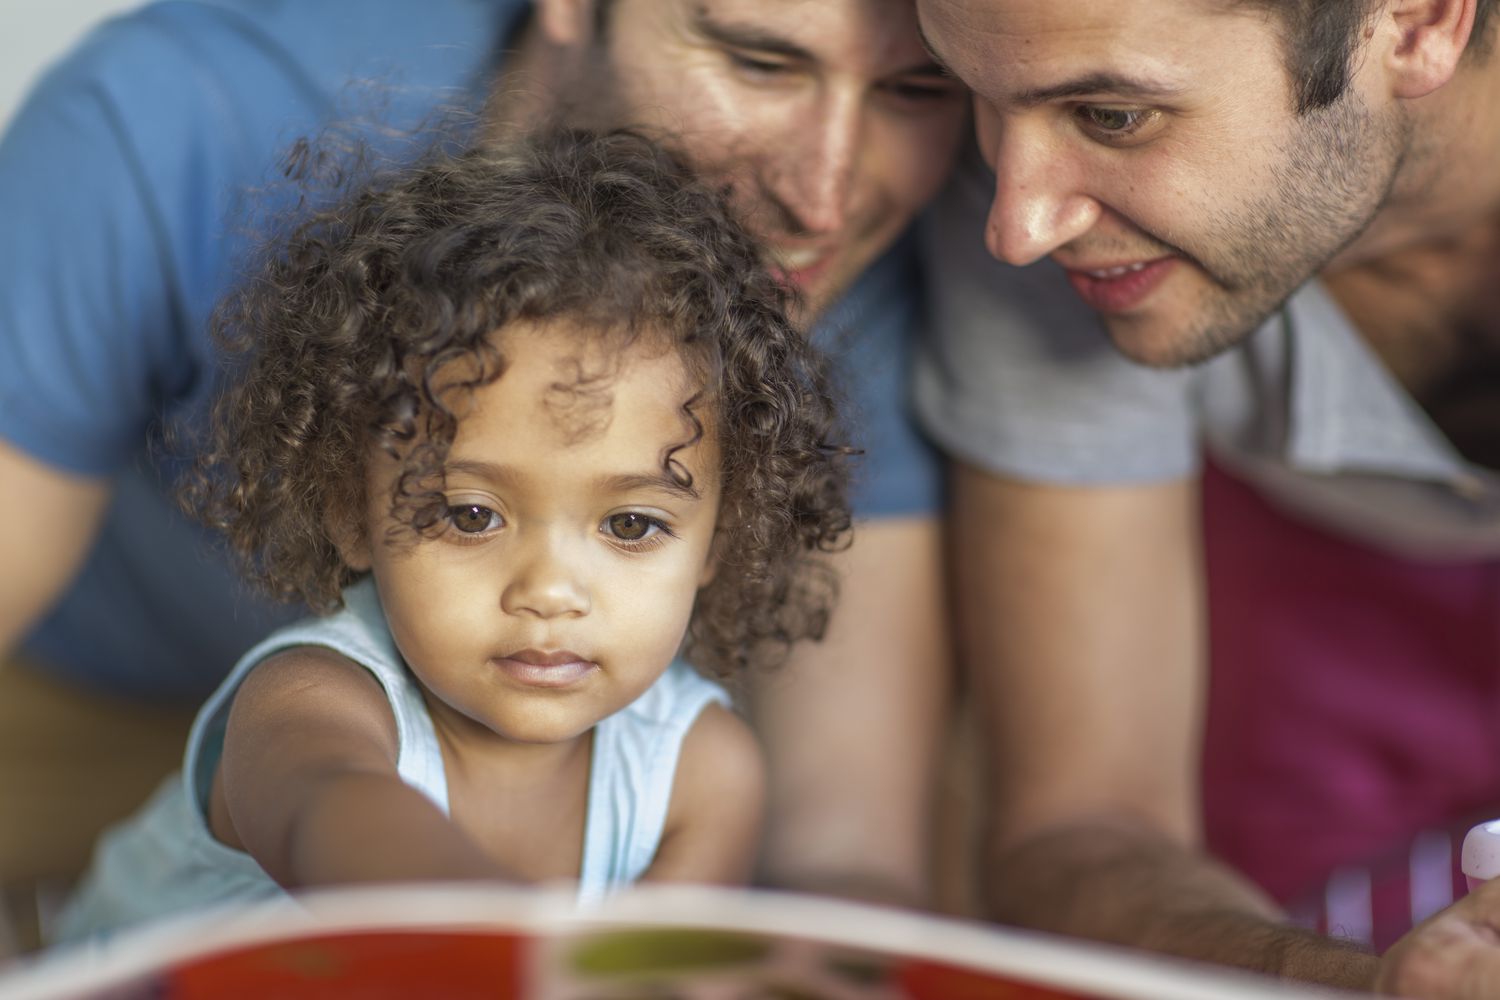 LGBT activists cancel Mother's Day because they support intentionally motherless families